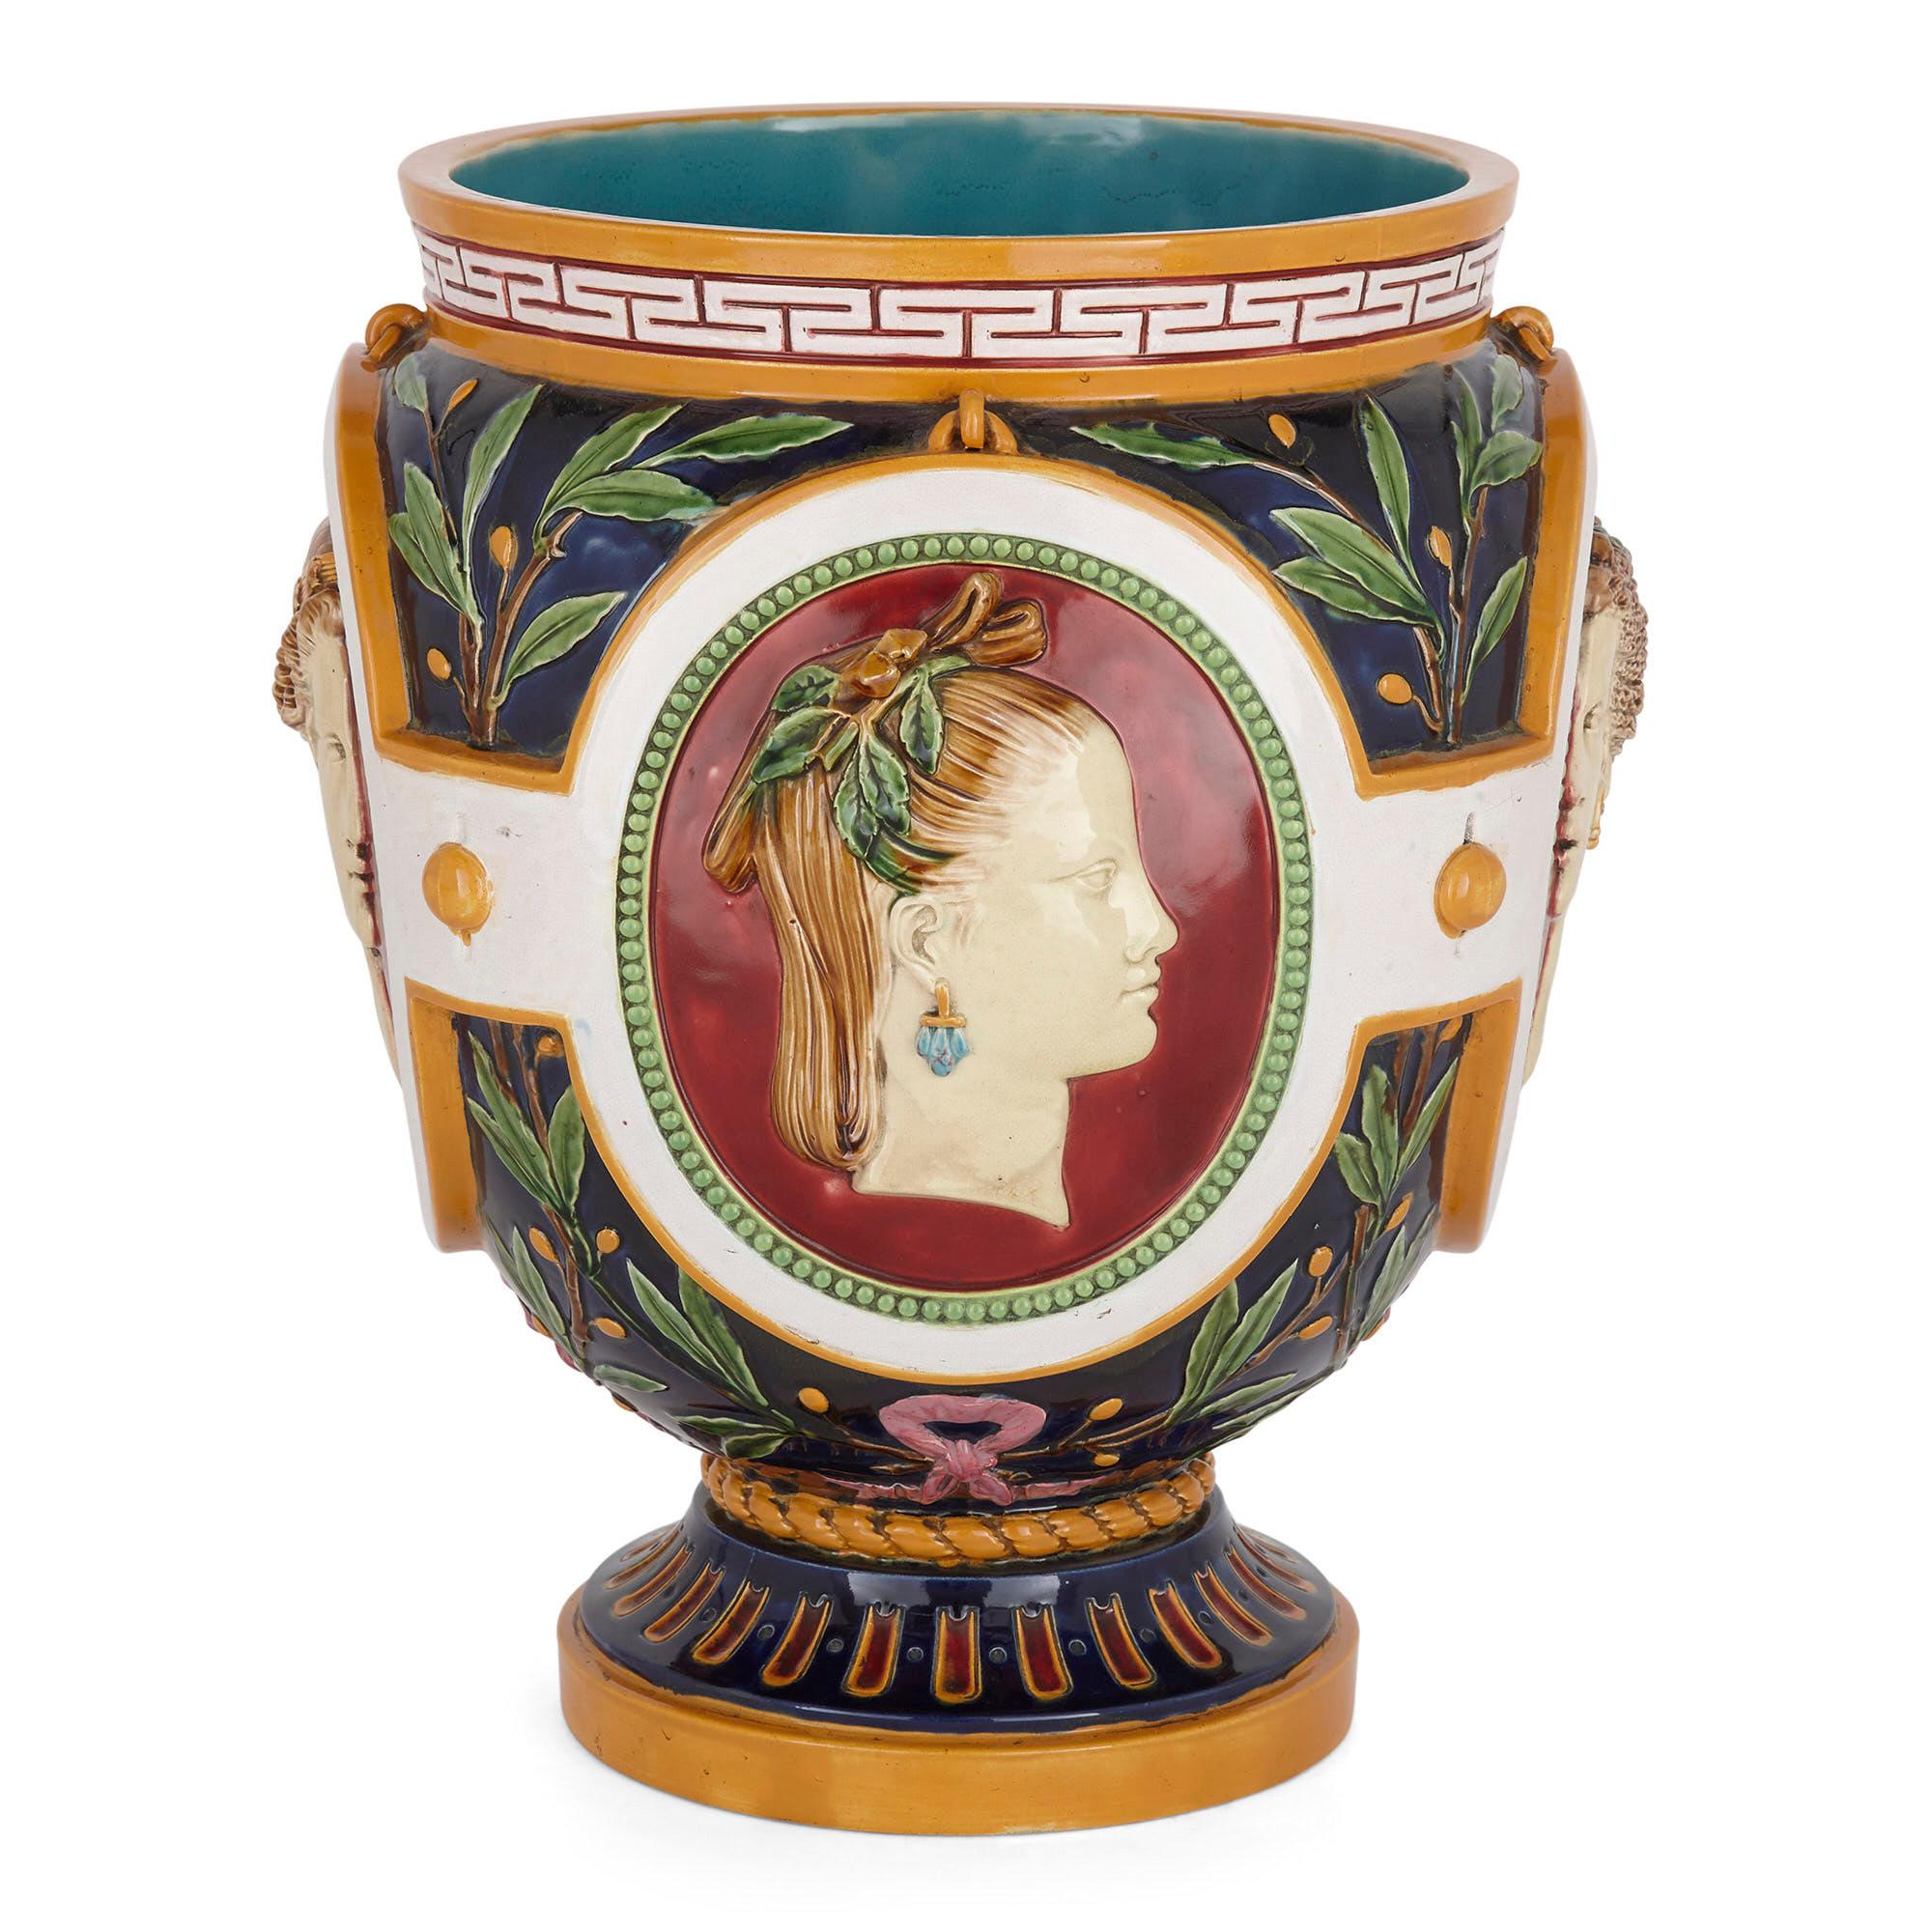 Victorian antique Majolica jardinière of the Four Seasons by Minton
English, c. 1905
Measures: Height 39cm, diameter 32cm

This characteristically colourful Majolica jardinière by Minton depicts four female relief profiles stylized as the Four